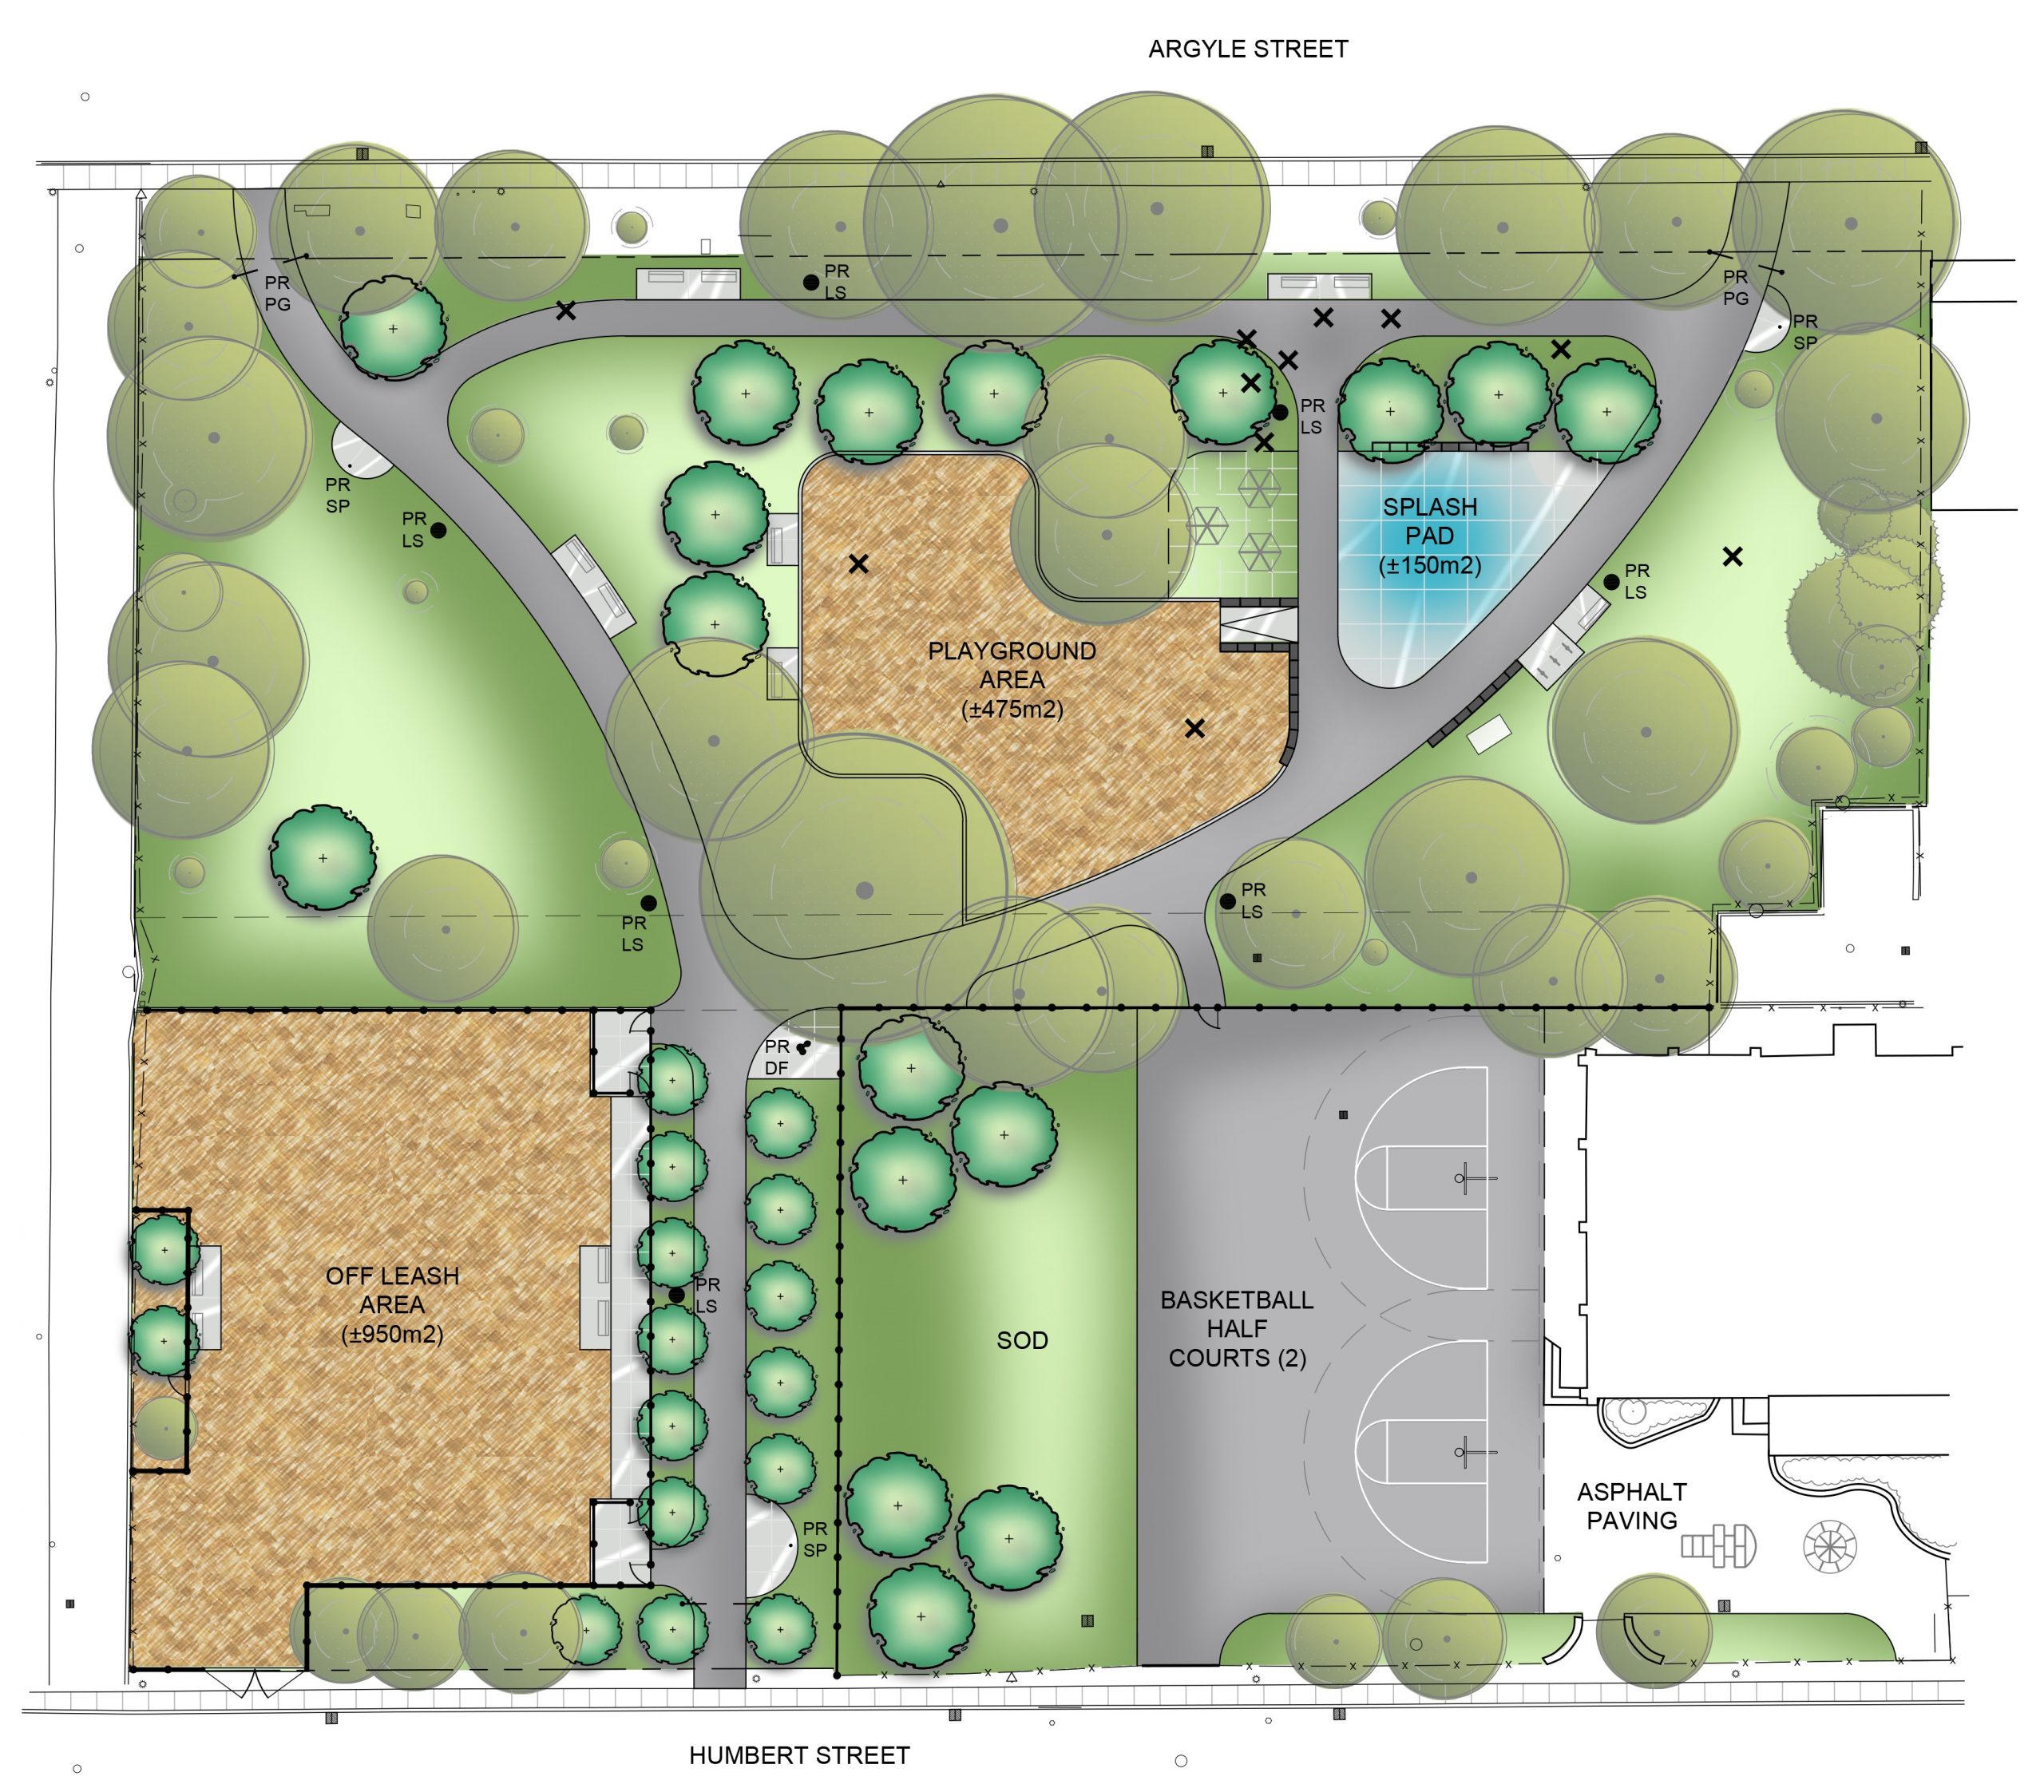 The preferred concept design for the improvements at Osler Playground and immediate adjacent School Grounds, which shows: Park entrances at the northwest corner, northeast corner and south end of the park New asphalt pathways, including a pathway loop, 3 metre wide main pathway connecting Argyle Street to Humbert Street with p-gates to prevent unwanted vehicular access, and 2.1 metre wide secondary pathway connections New playground area (approx. 475m2) with engineered cedar fibre safety surfacing, concrete playground borders, concrete ramp, armourstone seatwall, and new play equipment New splash pad (approx. 150m2) with splash pad drains, concrete paving and upgright and ground sprays New formal Off-Leash-Area (OLA) (approx. 950m2) located south of the Bell easement with 1.5 metre high chain link fencing, double gate entrances, maintenance gates, concrete borders, engineered wood fibre surfacing, irrigation, concrete walkway, and seating Open green space area at the west and east ends of the park New seating and seating areas including City standard benches, concrete paved seating area with patio style tables with umbrellas, and armourstone seatwalls, budget permitting Concrete pads for trash and recycling receptacles at park entrances New bottle filling station/ drinking fountain/ pet bowl combination located centrally in the park Bike/ stroller parking area New lighting and electrical service for special events Removal of fencing fronting Argyle Street and bisecting the park New 1.8 metre high galvanized chain link fence with gate between the School and Park properties, for safety. 27 new tree plantings and 11 tree removals on park property School grounds to receive new grass, tree plantings, and 2 asphalt paved basketball half-courts